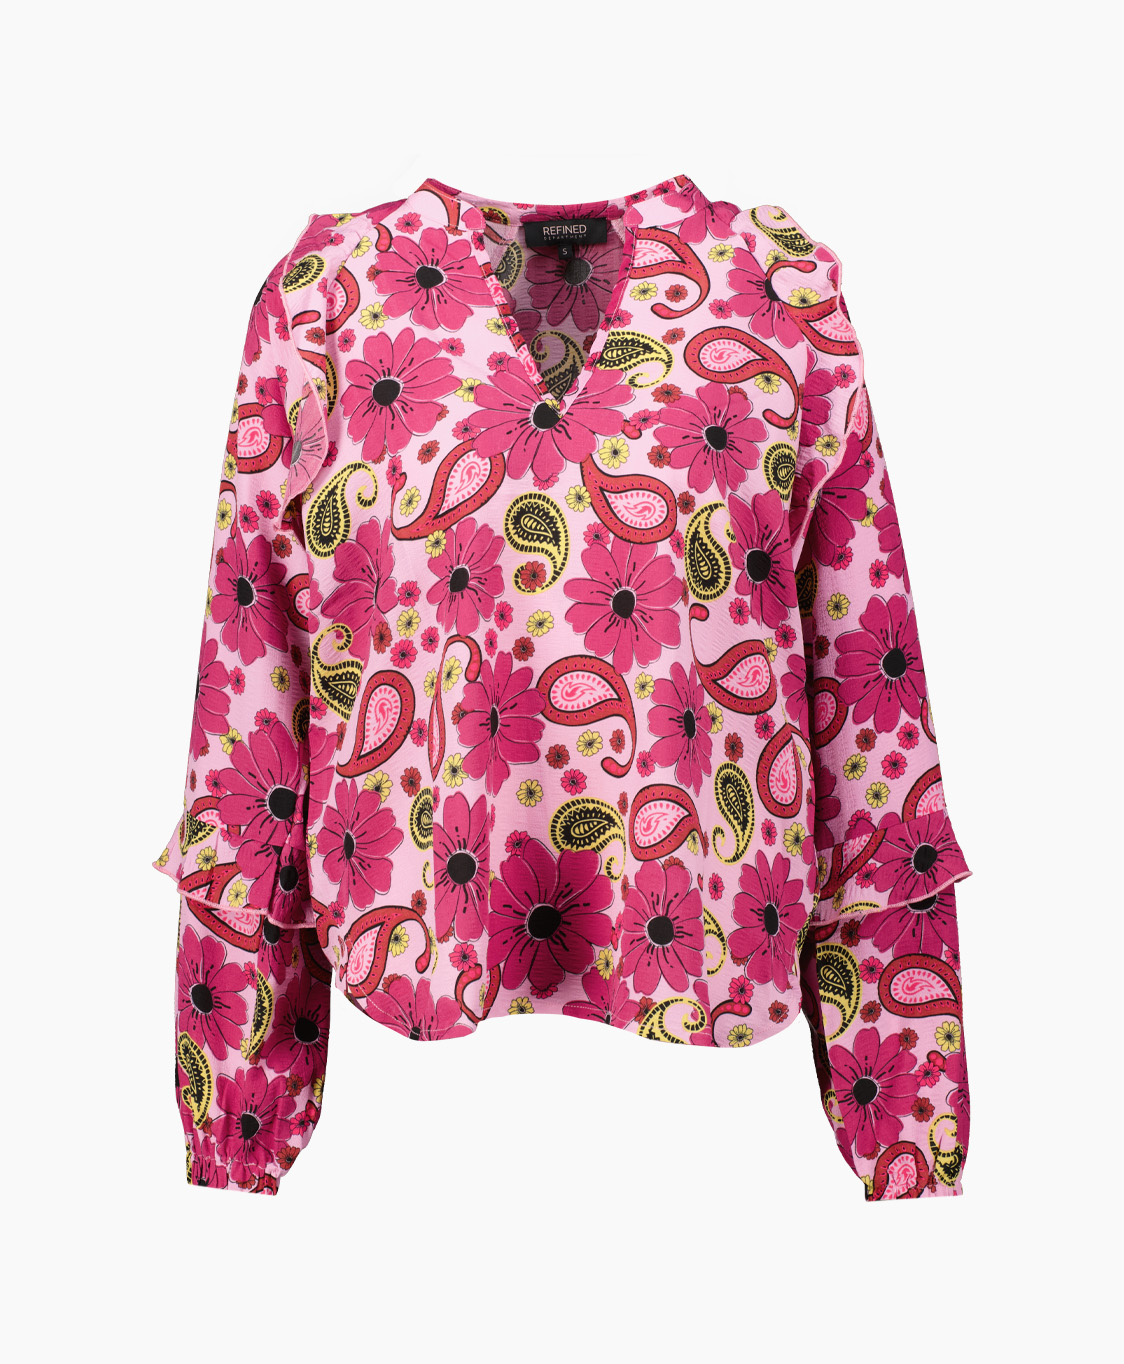 Refined Department Blouse R2305935106 Pink